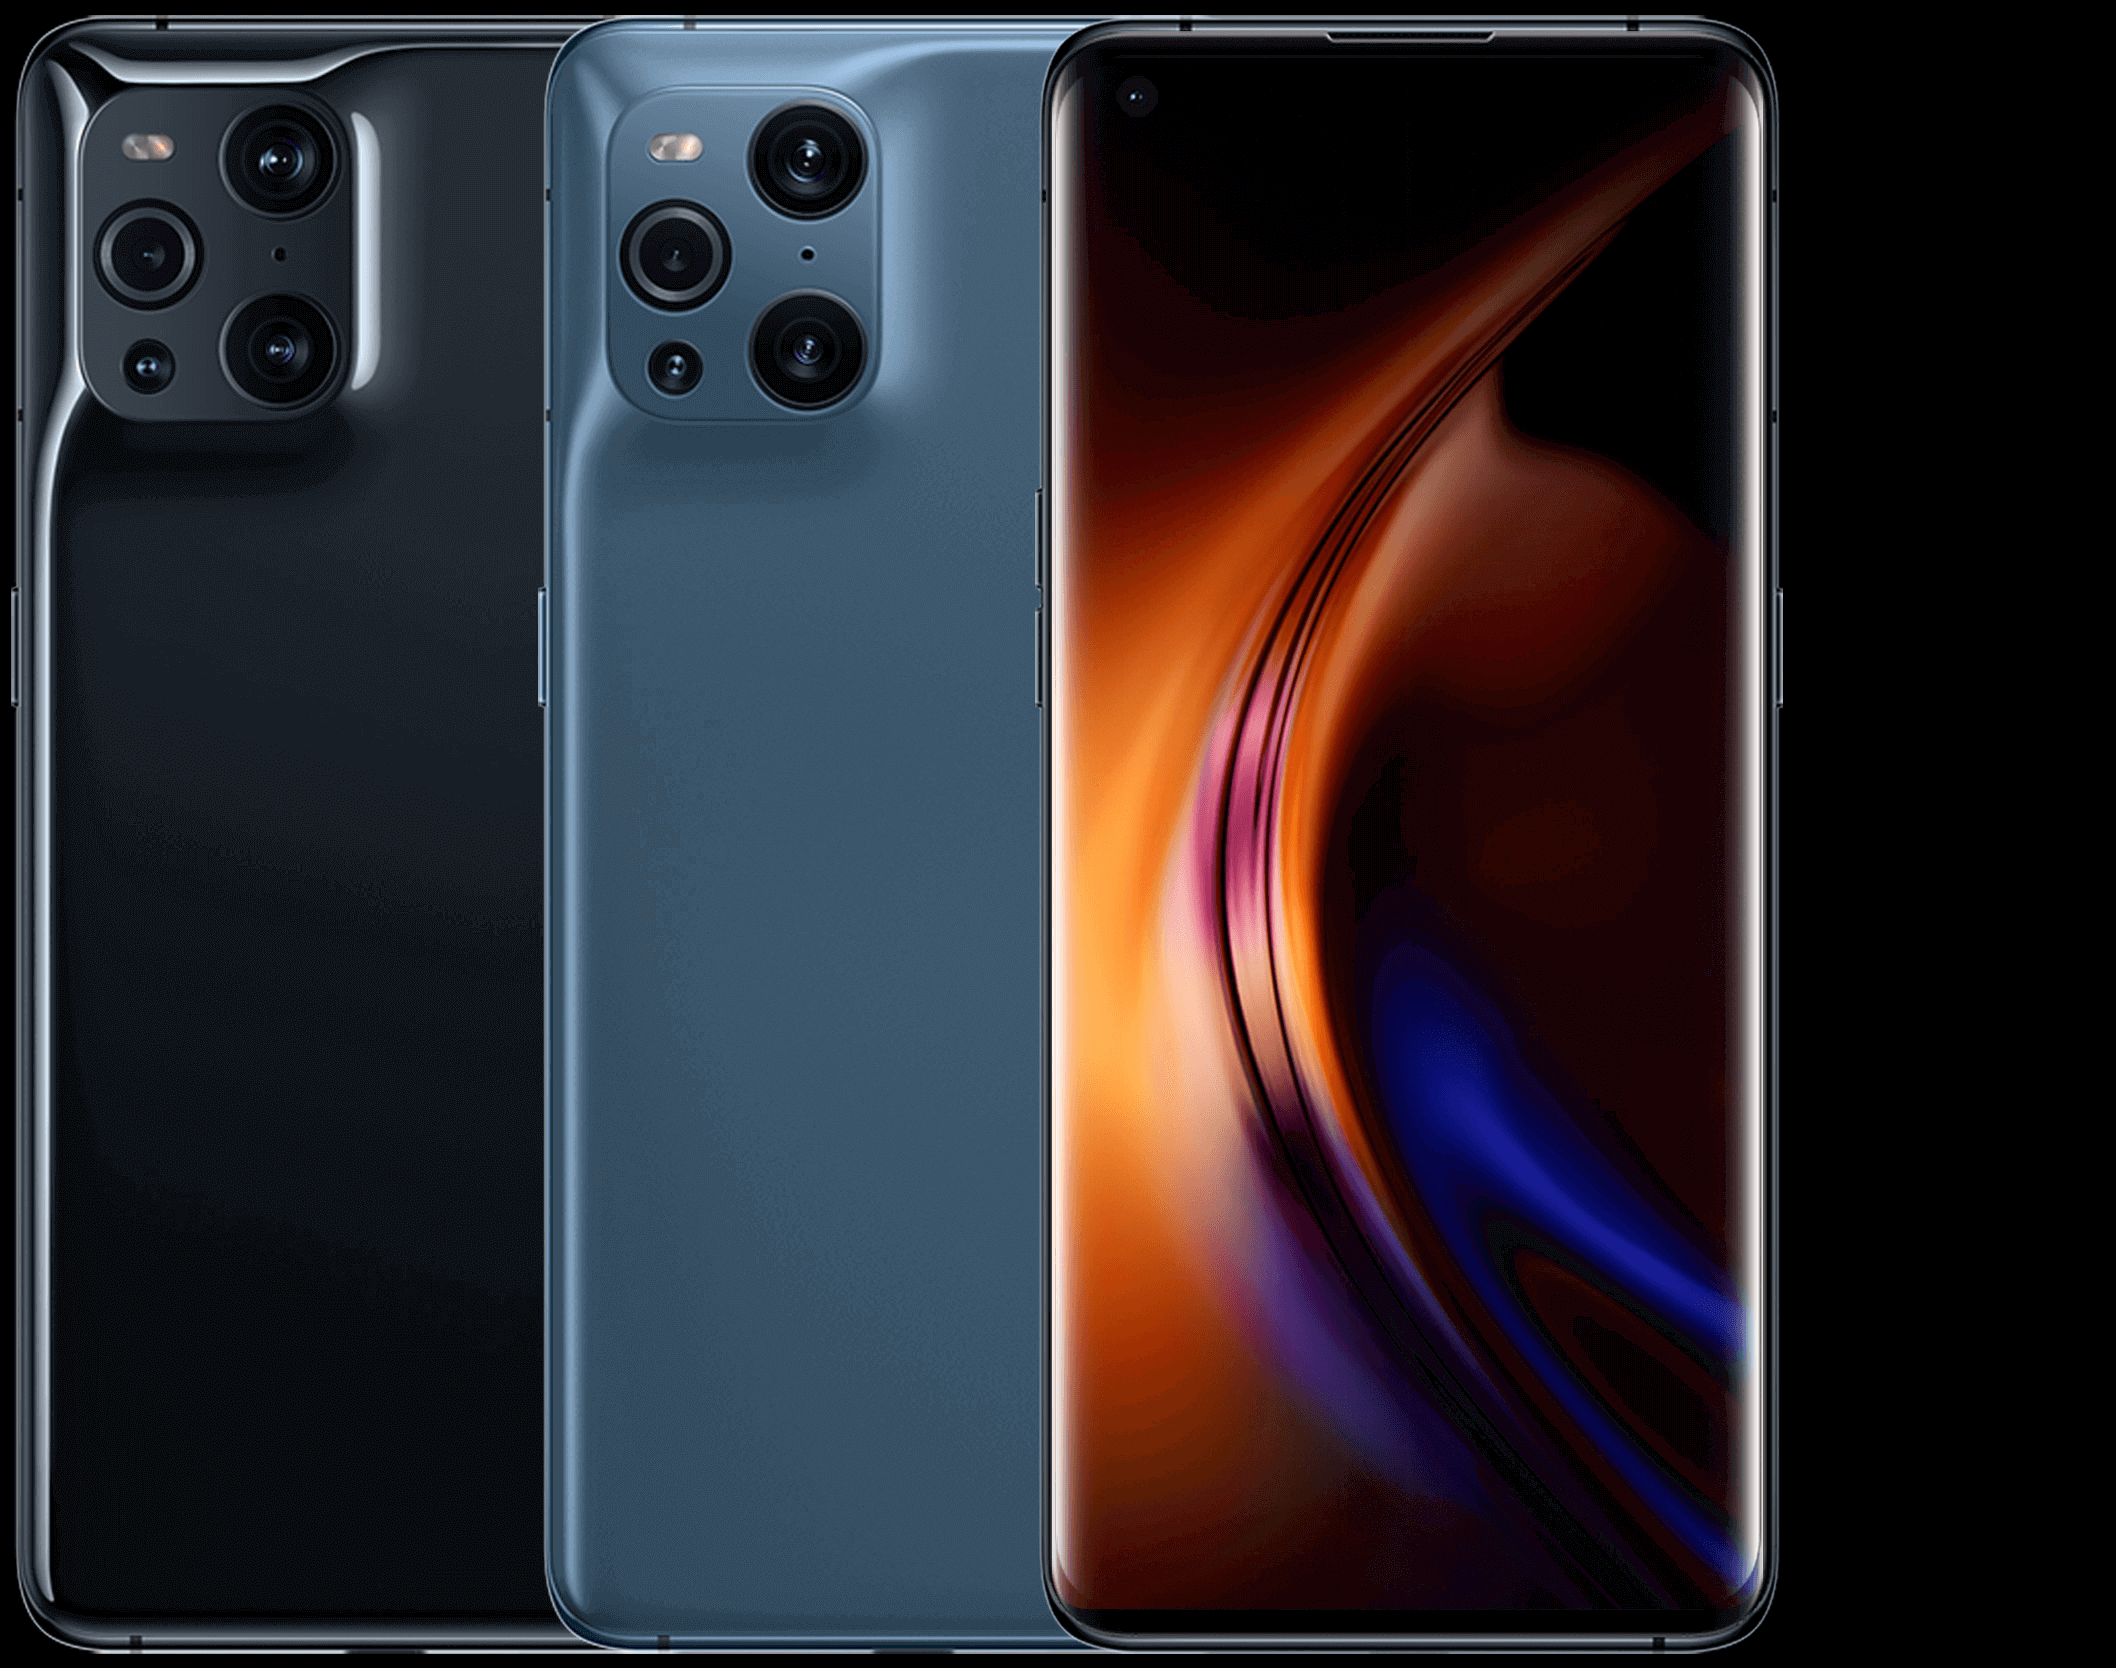 OPPO Find X3 Pro - Specifications | OPPO Global